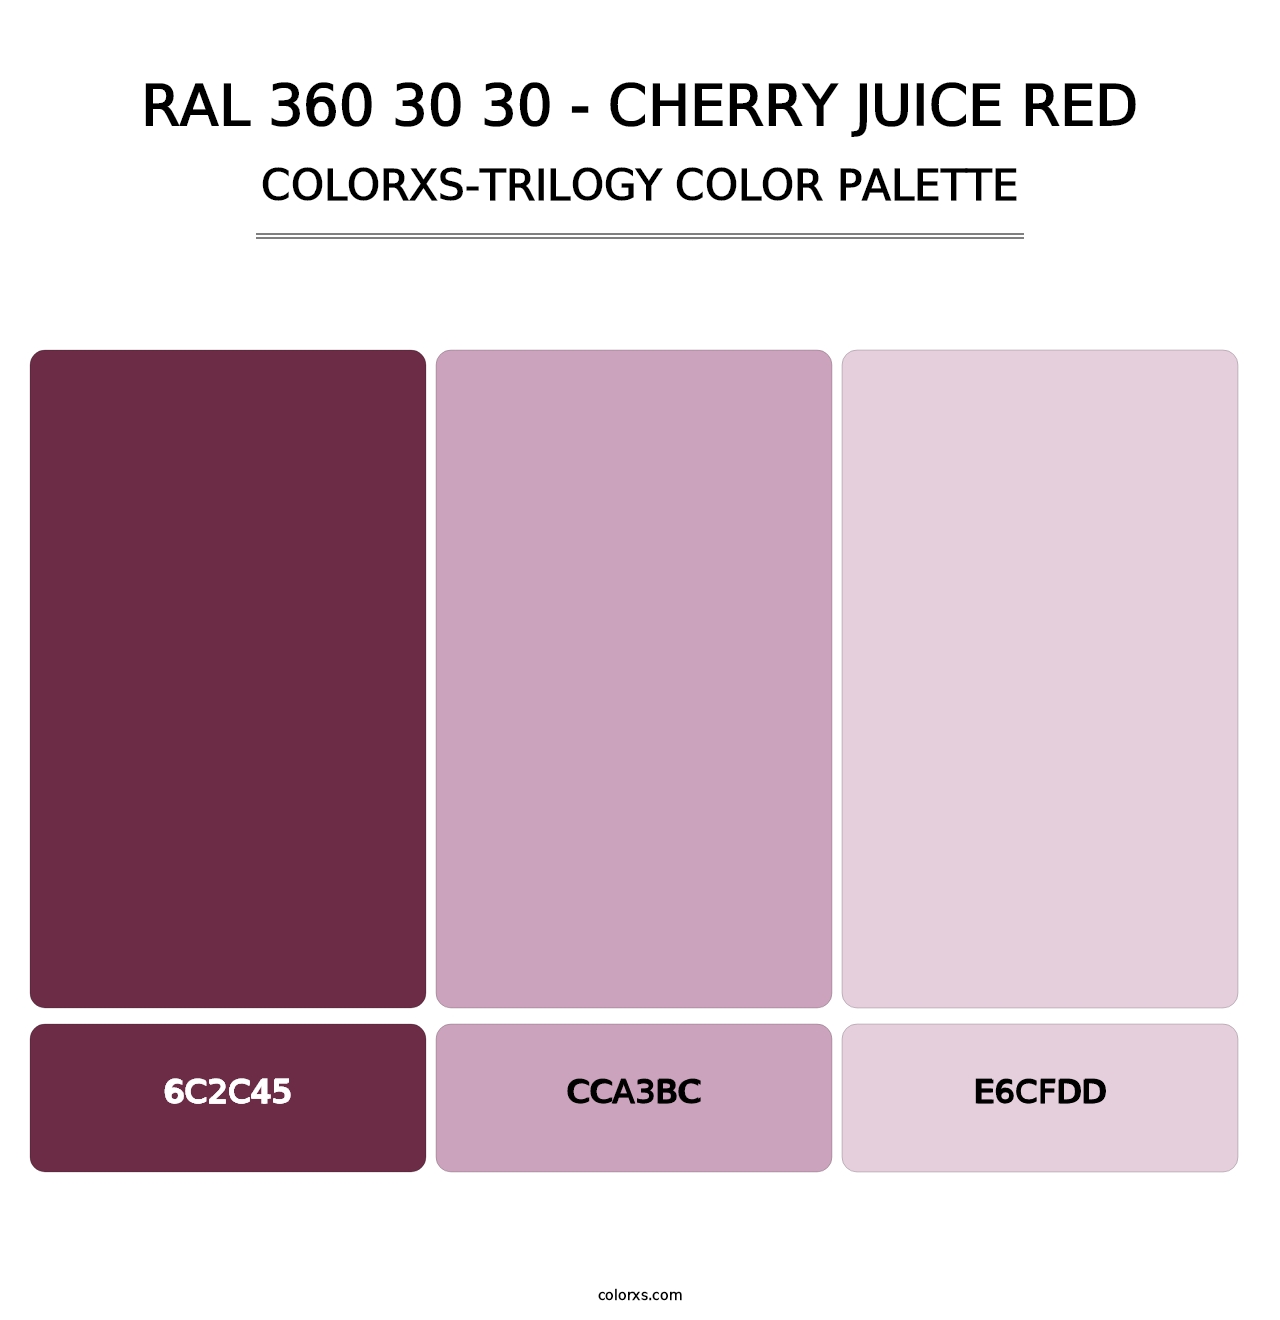 RAL 360 30 30 - Cherry Juice Red - Colorxs Trilogy Palette